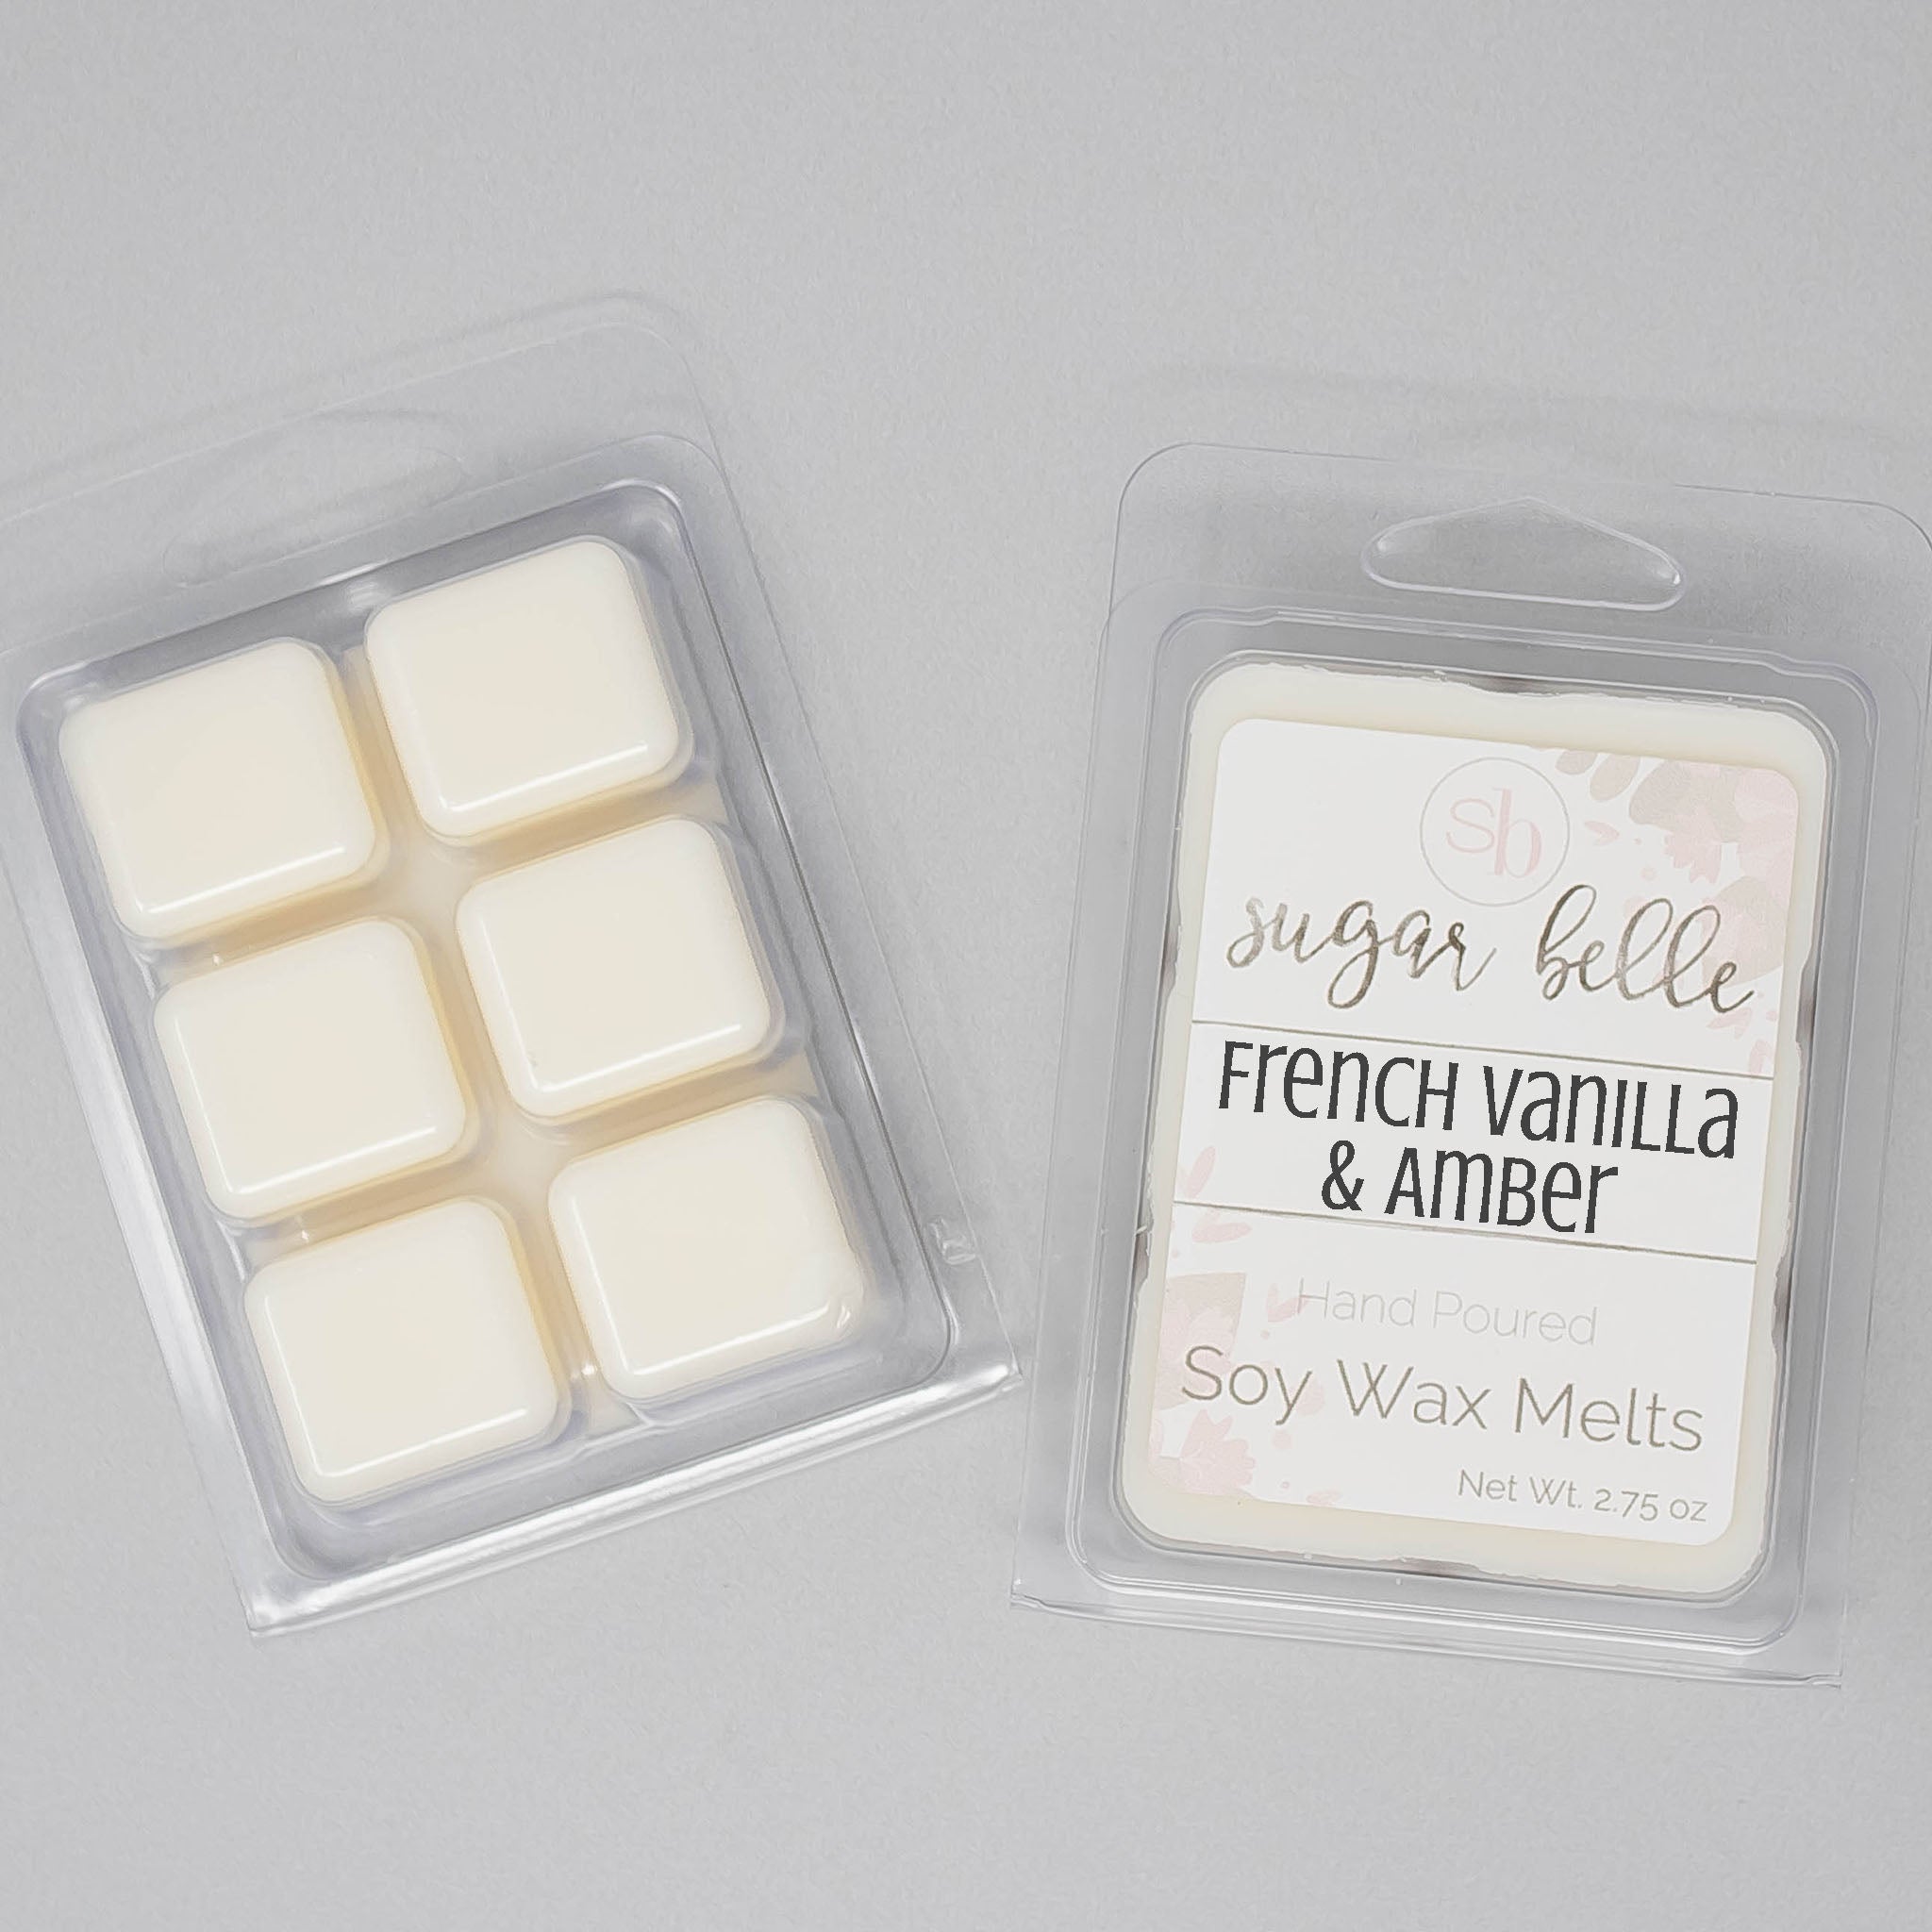 French Vanilla & Amber Scented Soy Wax Melts – Sugar Belle Candles